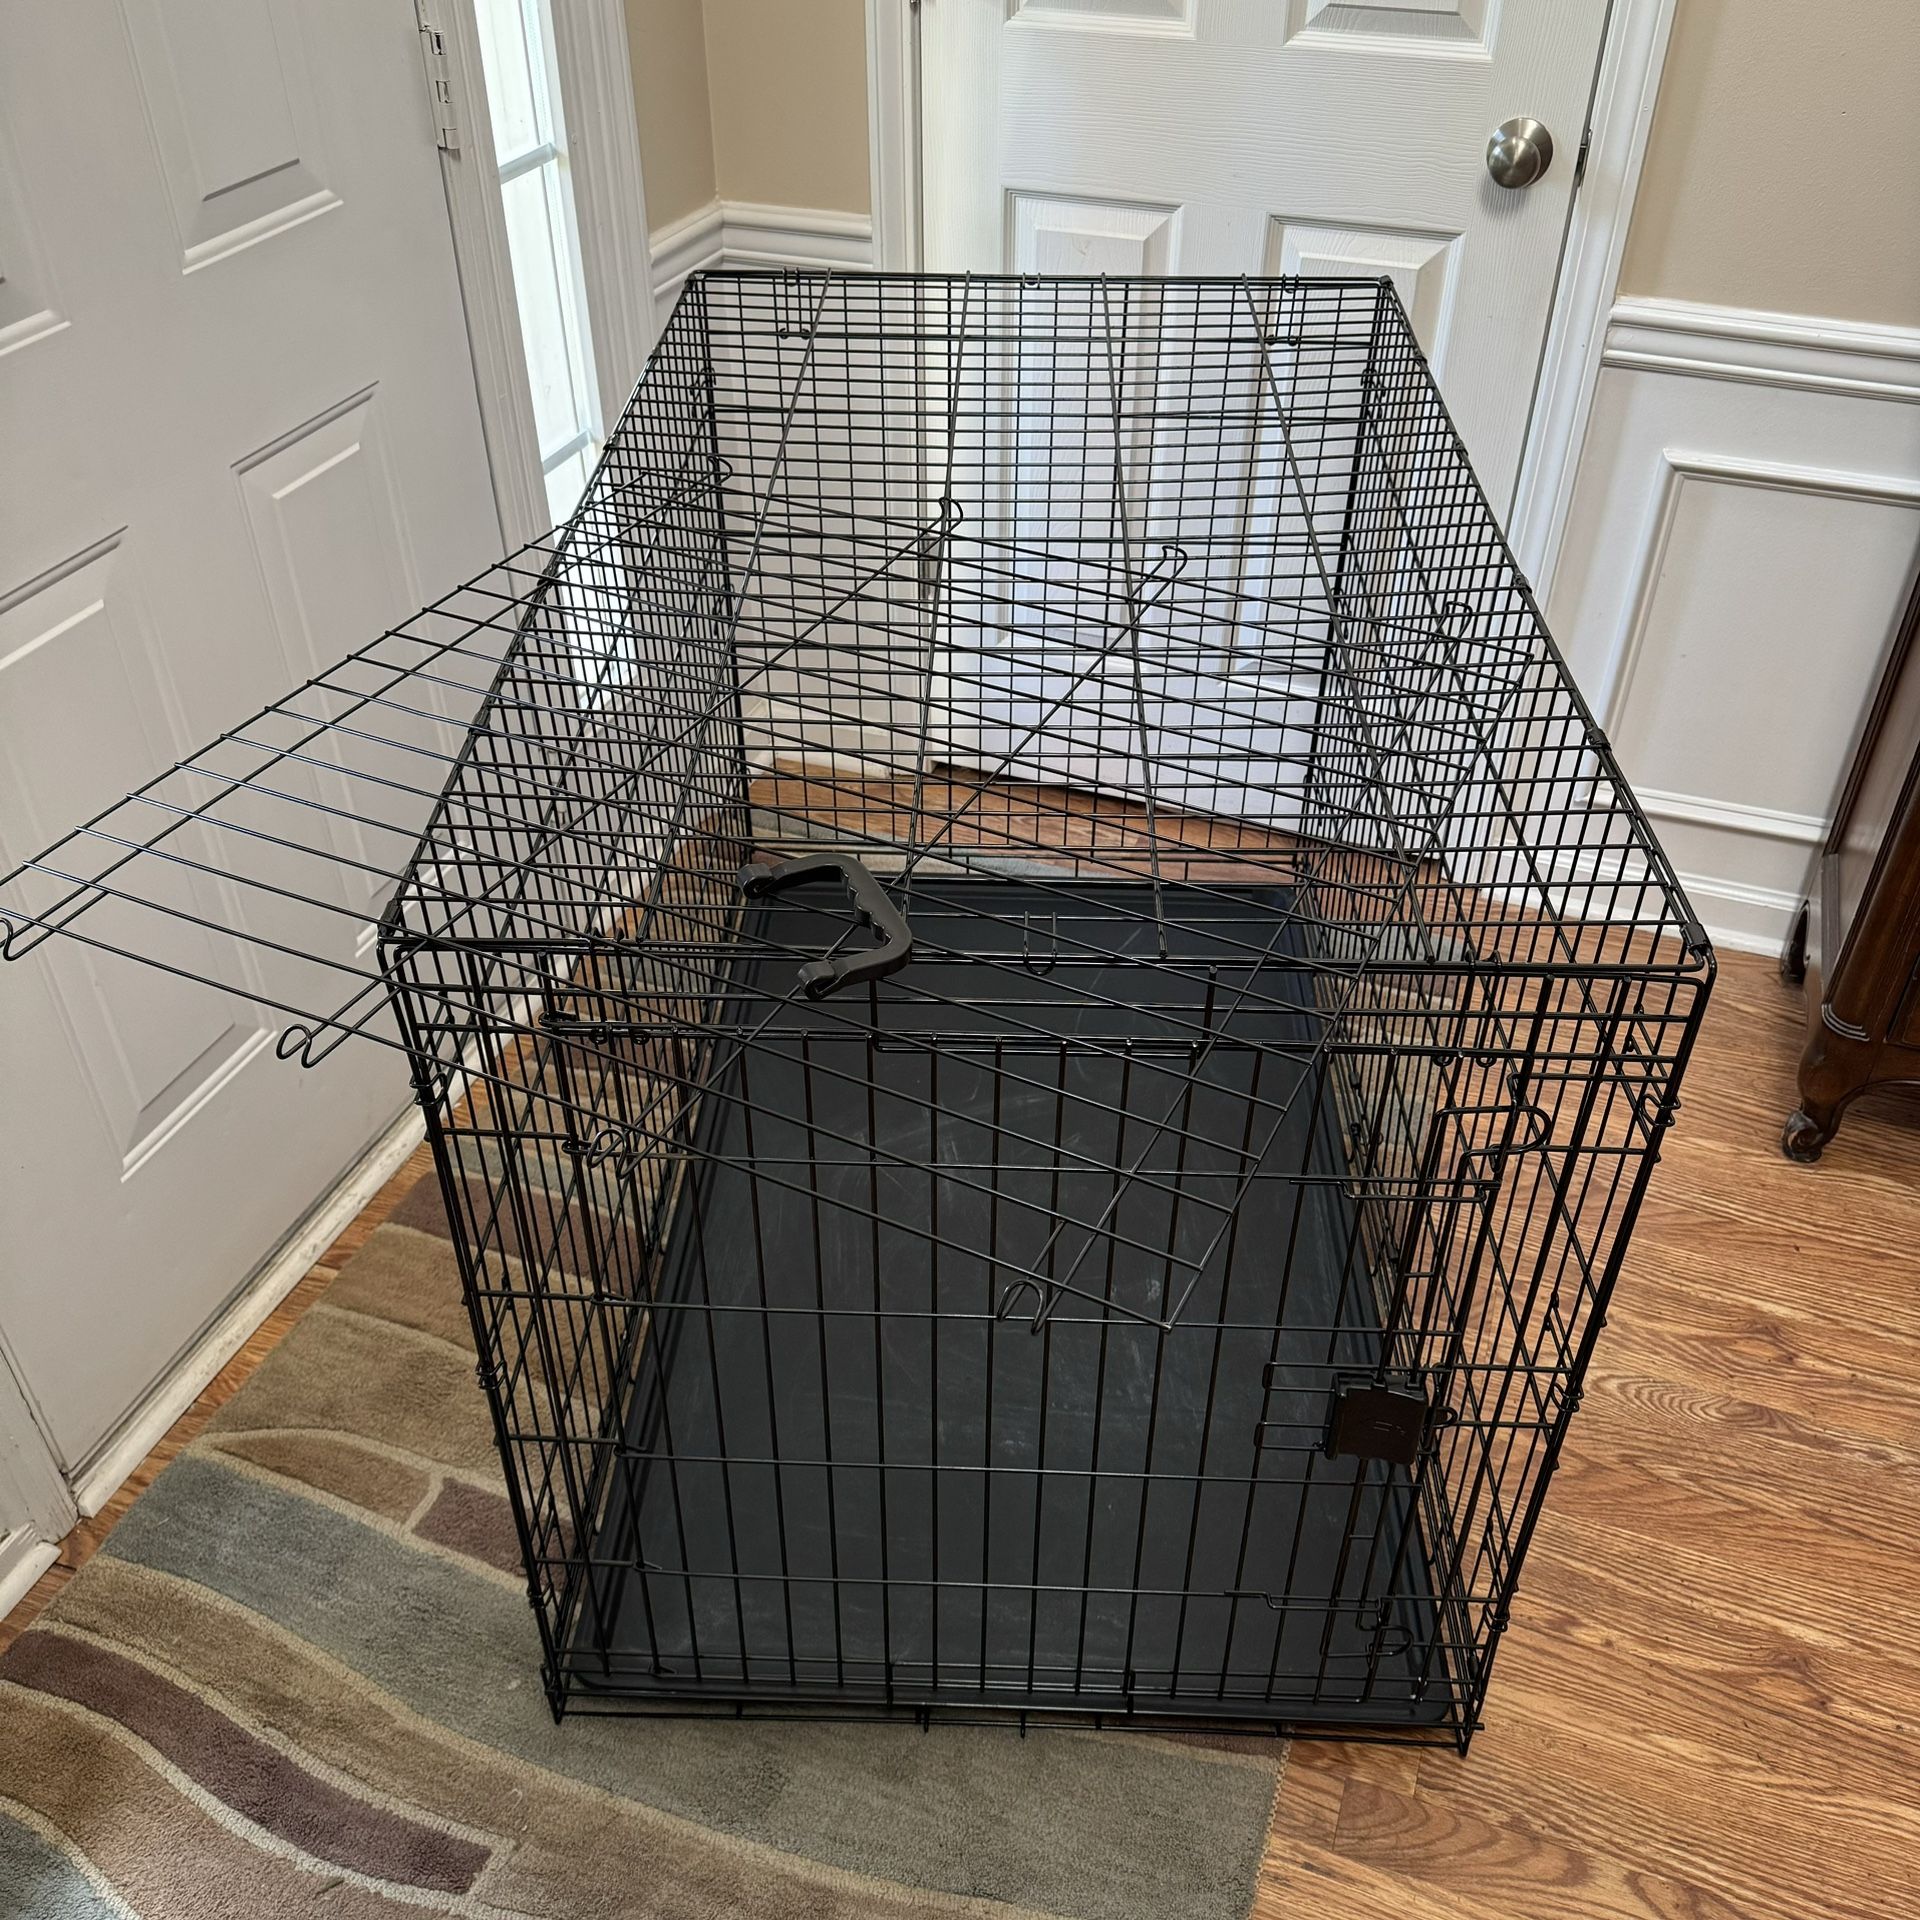 48" Foldable Metal Dog Crate w/Divider - Ideal for Large Breed Puppy or 2 Dogs